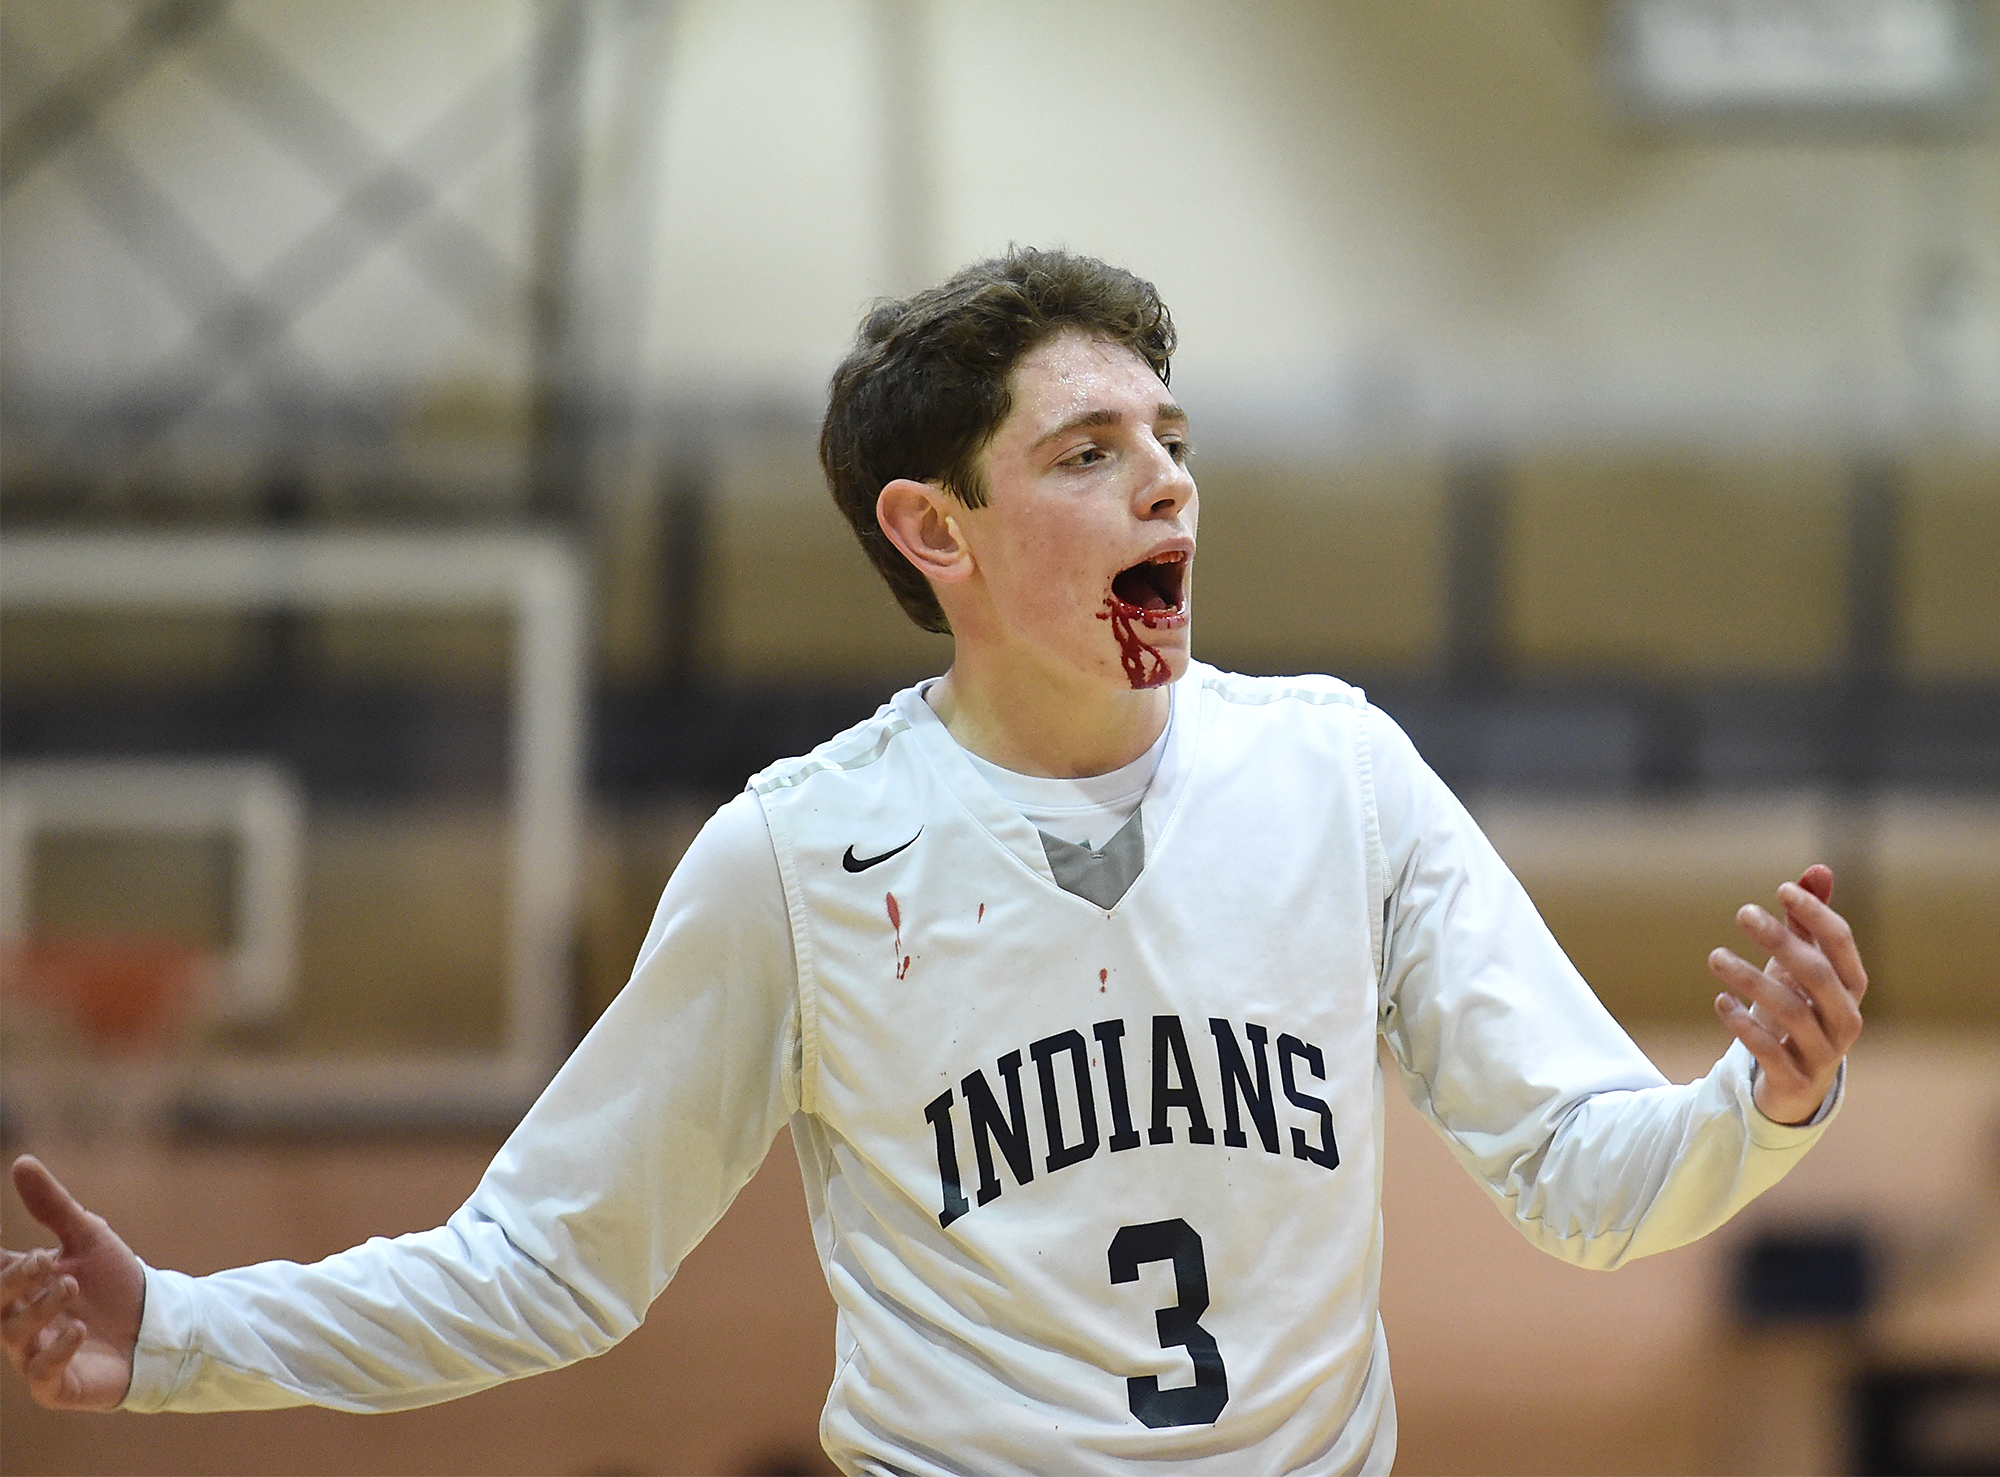  Council Rock North's Riley Thompson (3) puts his hands in the air after getting an offensive foul call against him that left him bleeding during their game in the opening round of the Athletes Helping Athletes Classic at Council Rock North. Central 